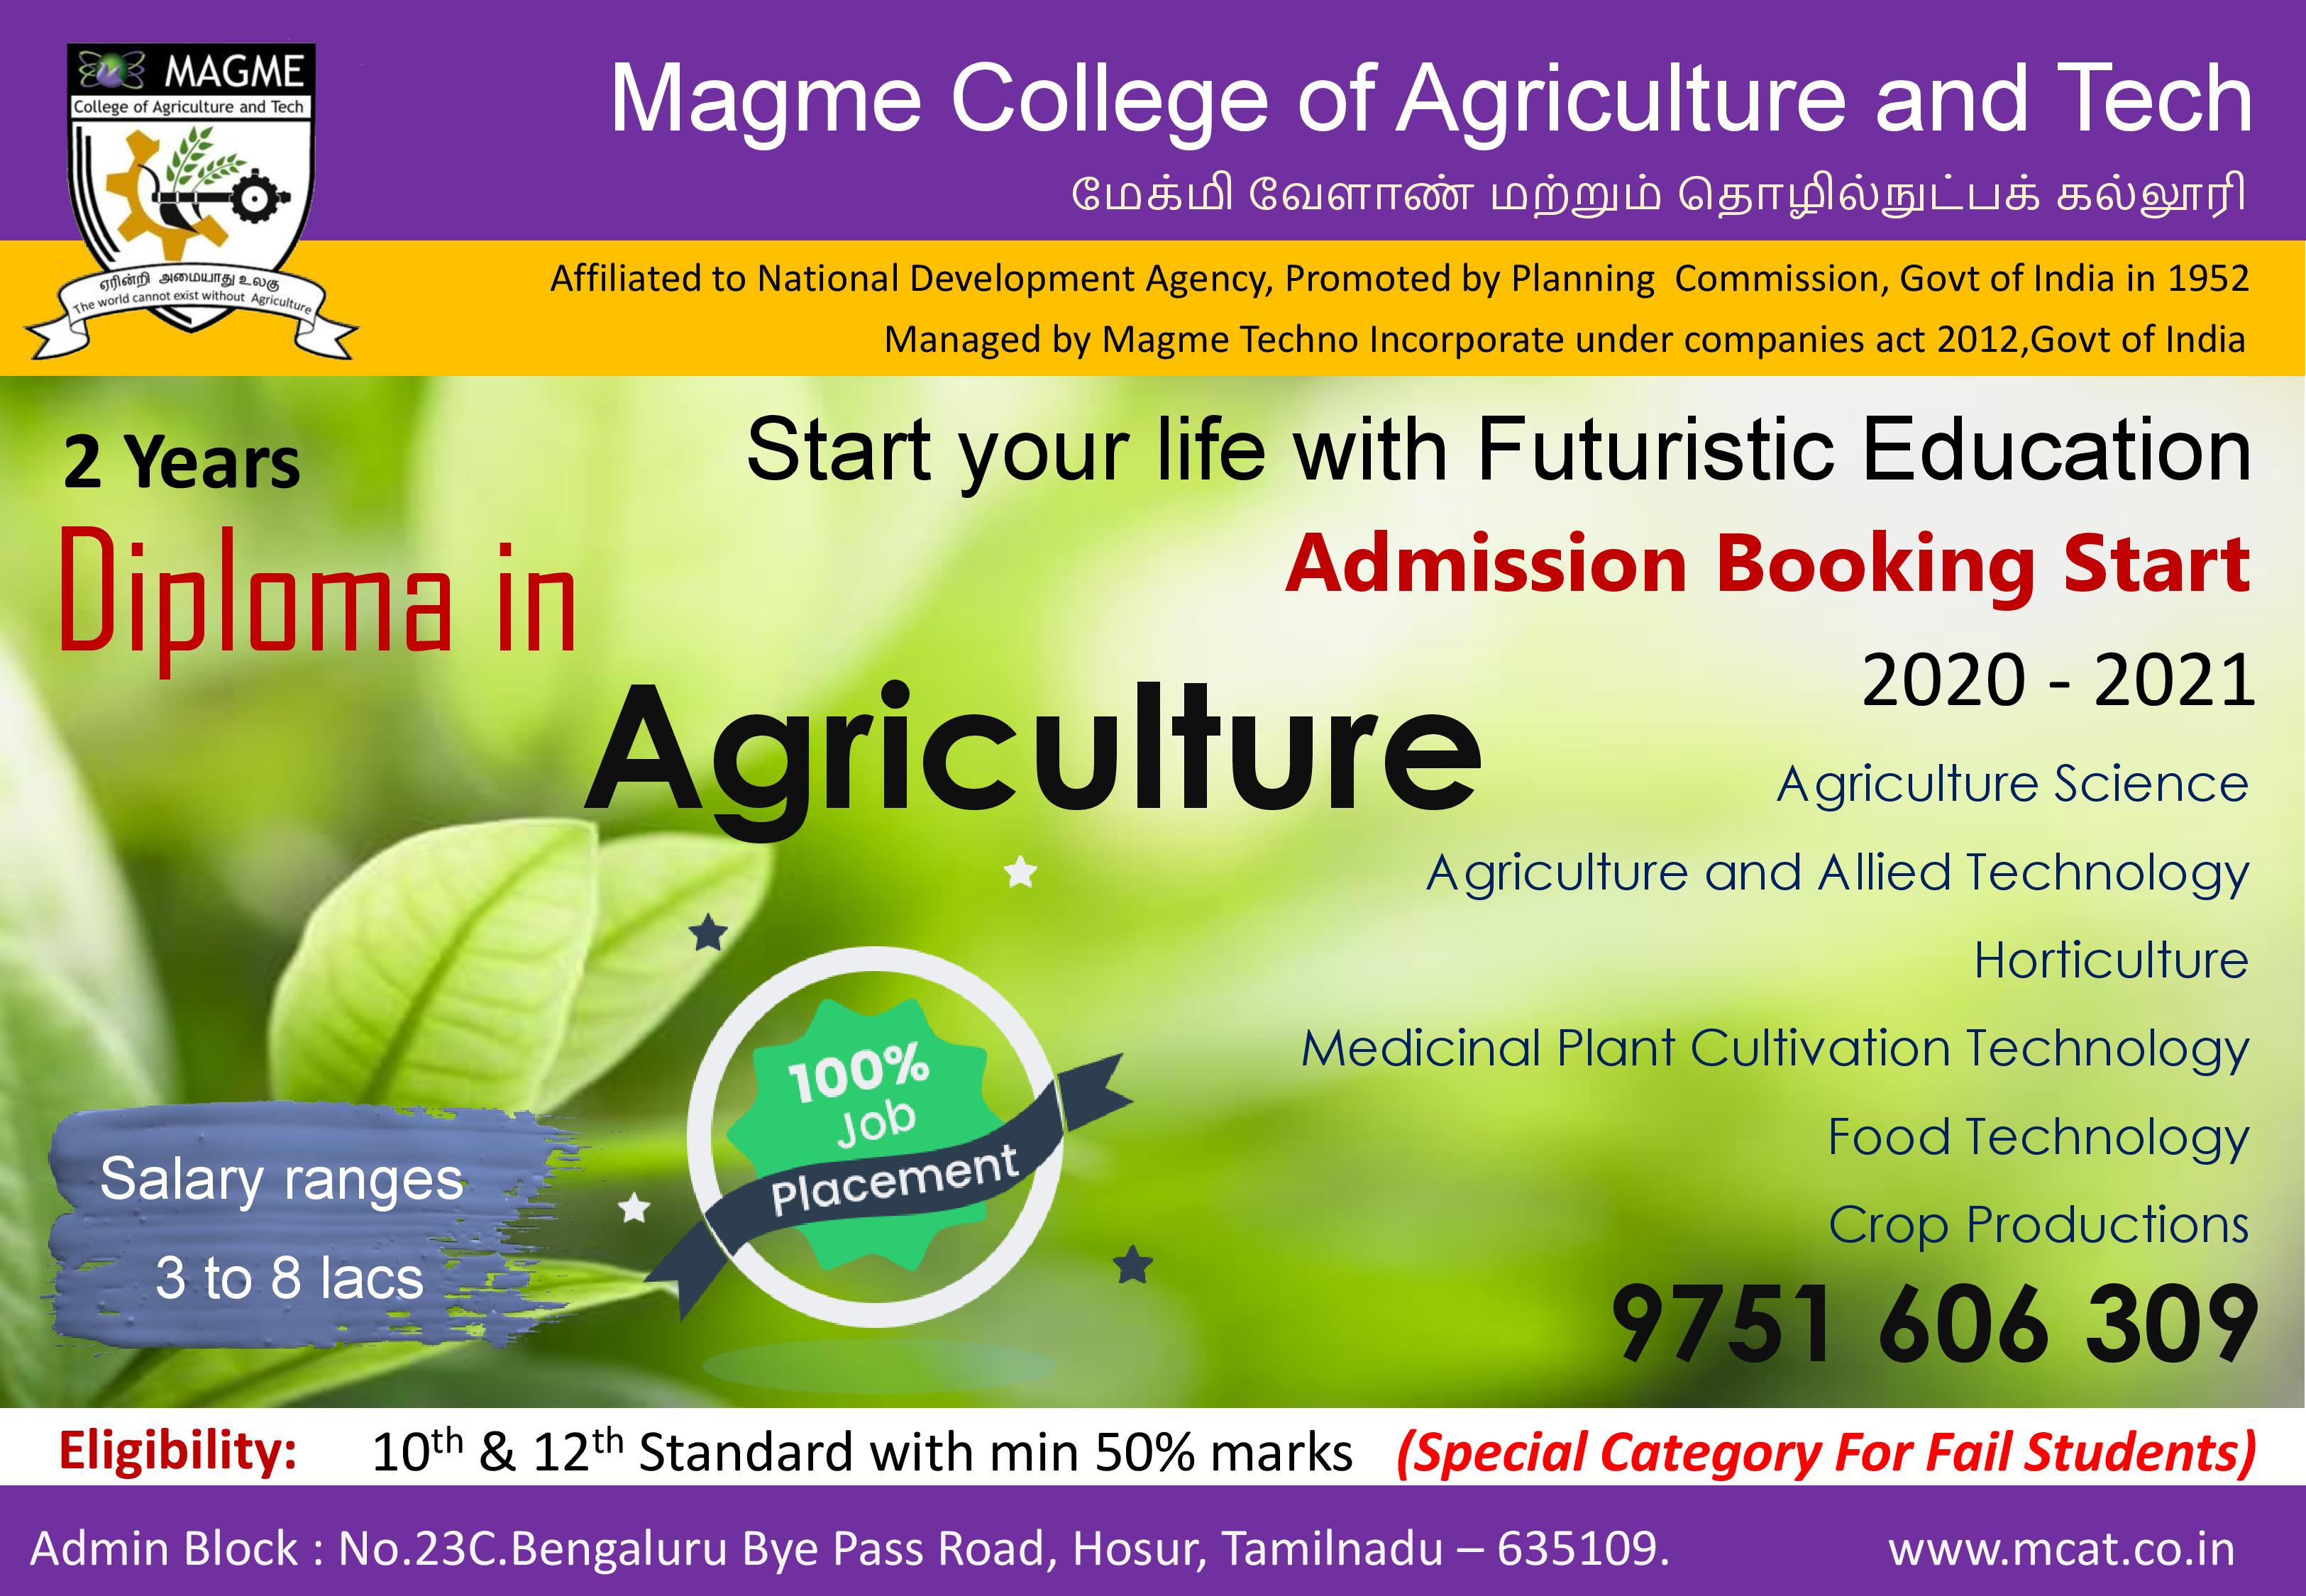 Magme College of Agriculture